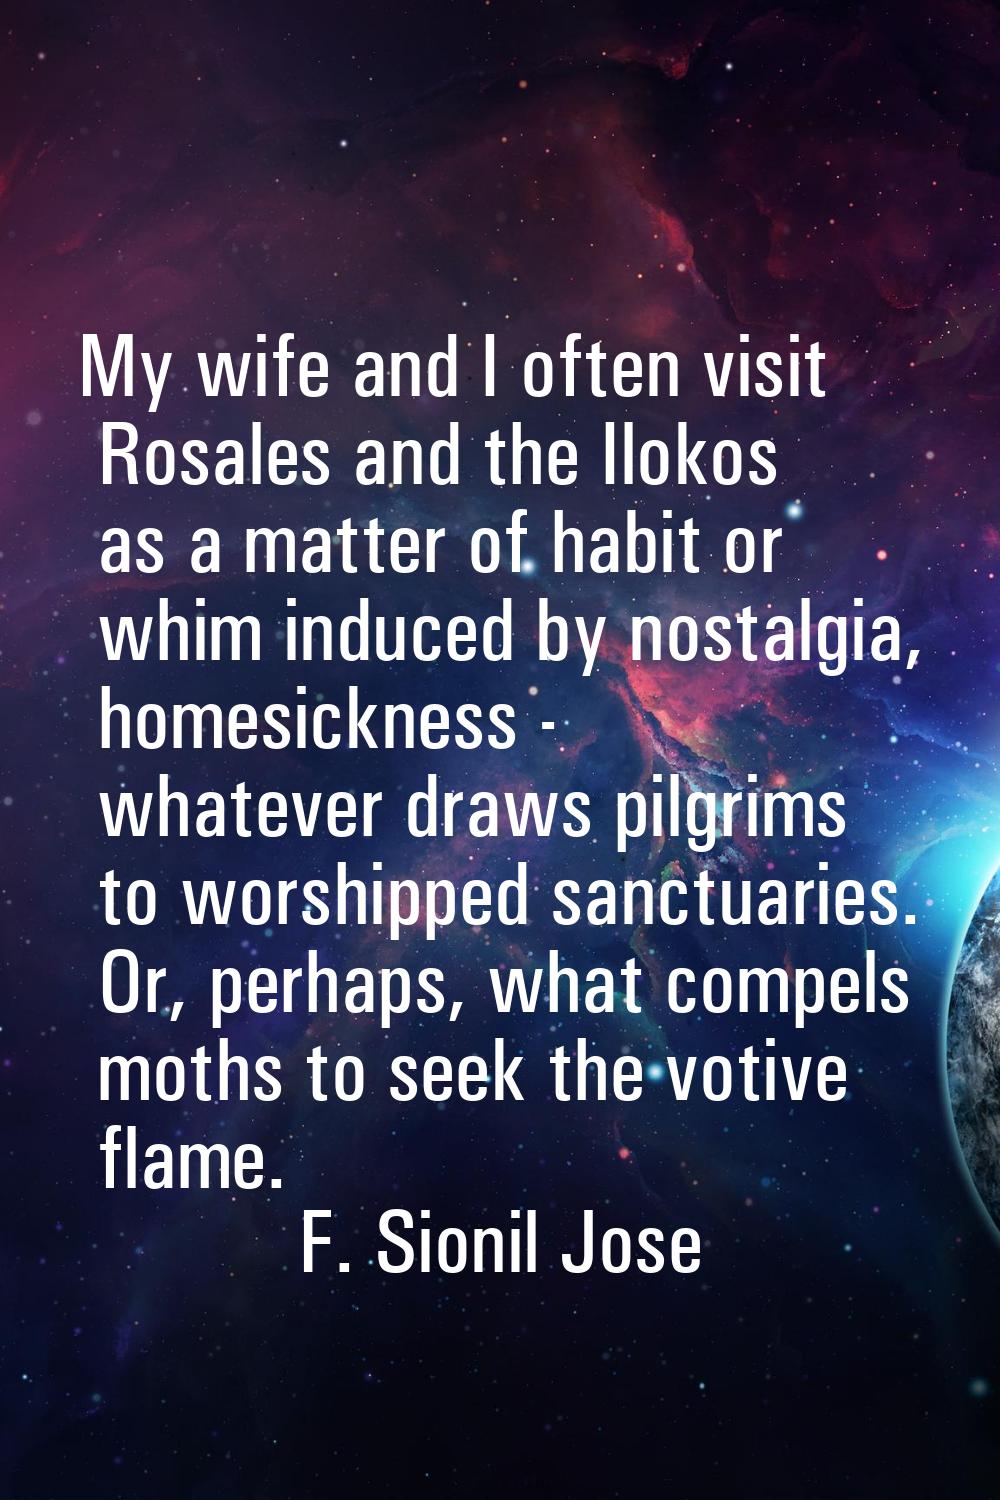 My wife and I often visit Rosales and the Ilokos as a matter of habit or whim induced by nostalgia,